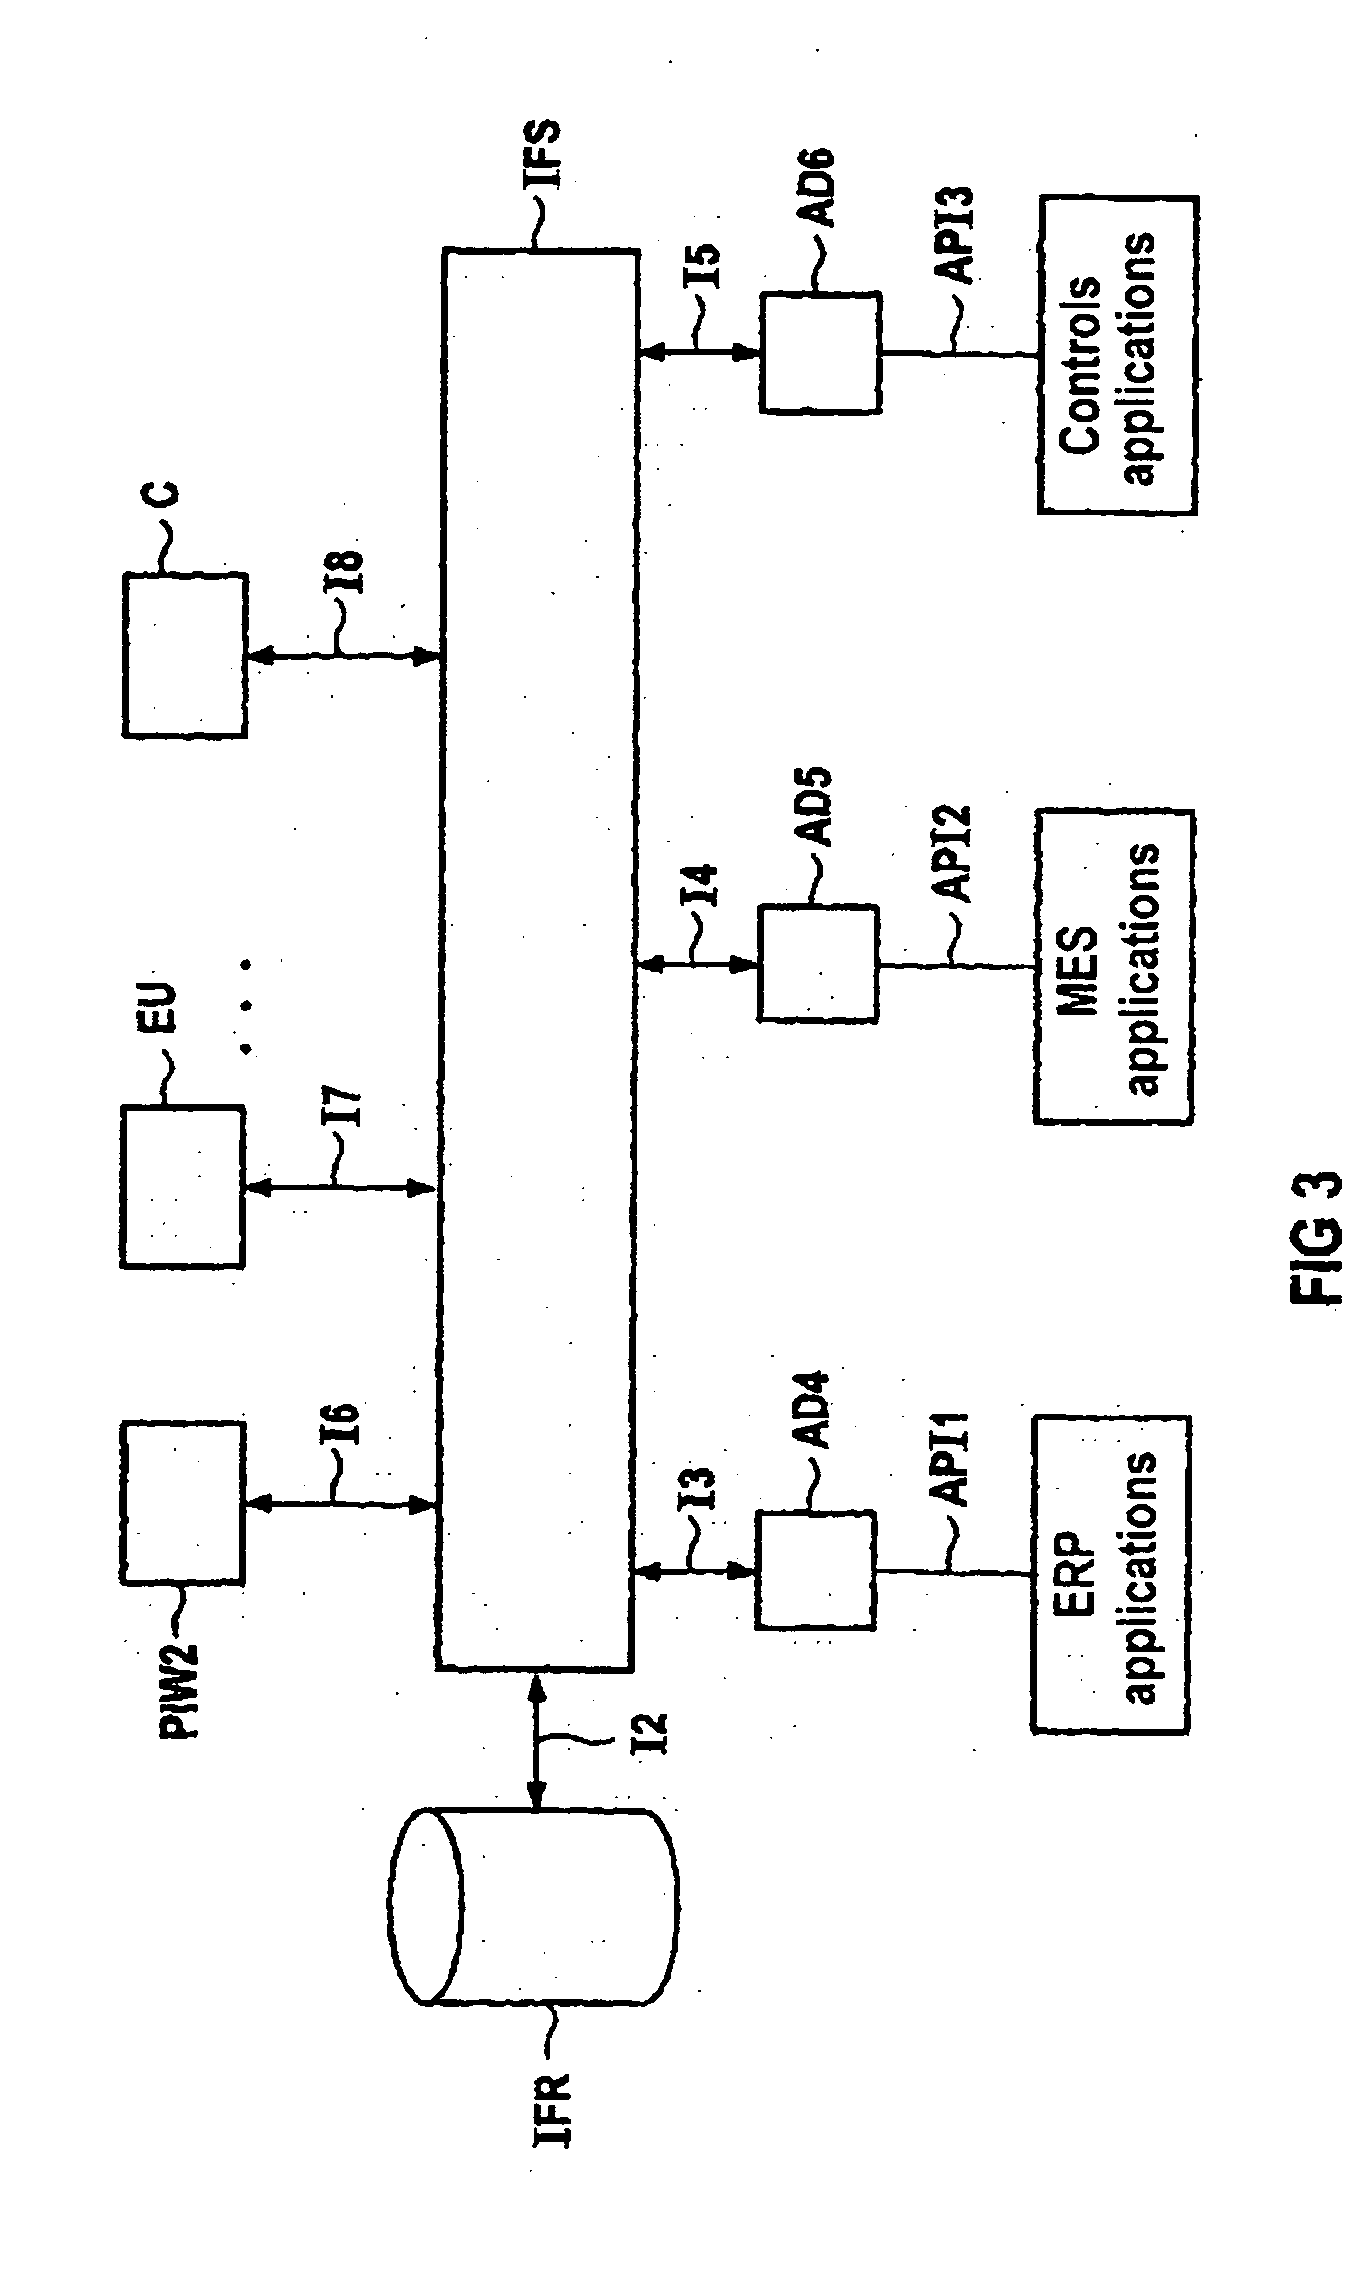 System and method for projecting transformations of object trees